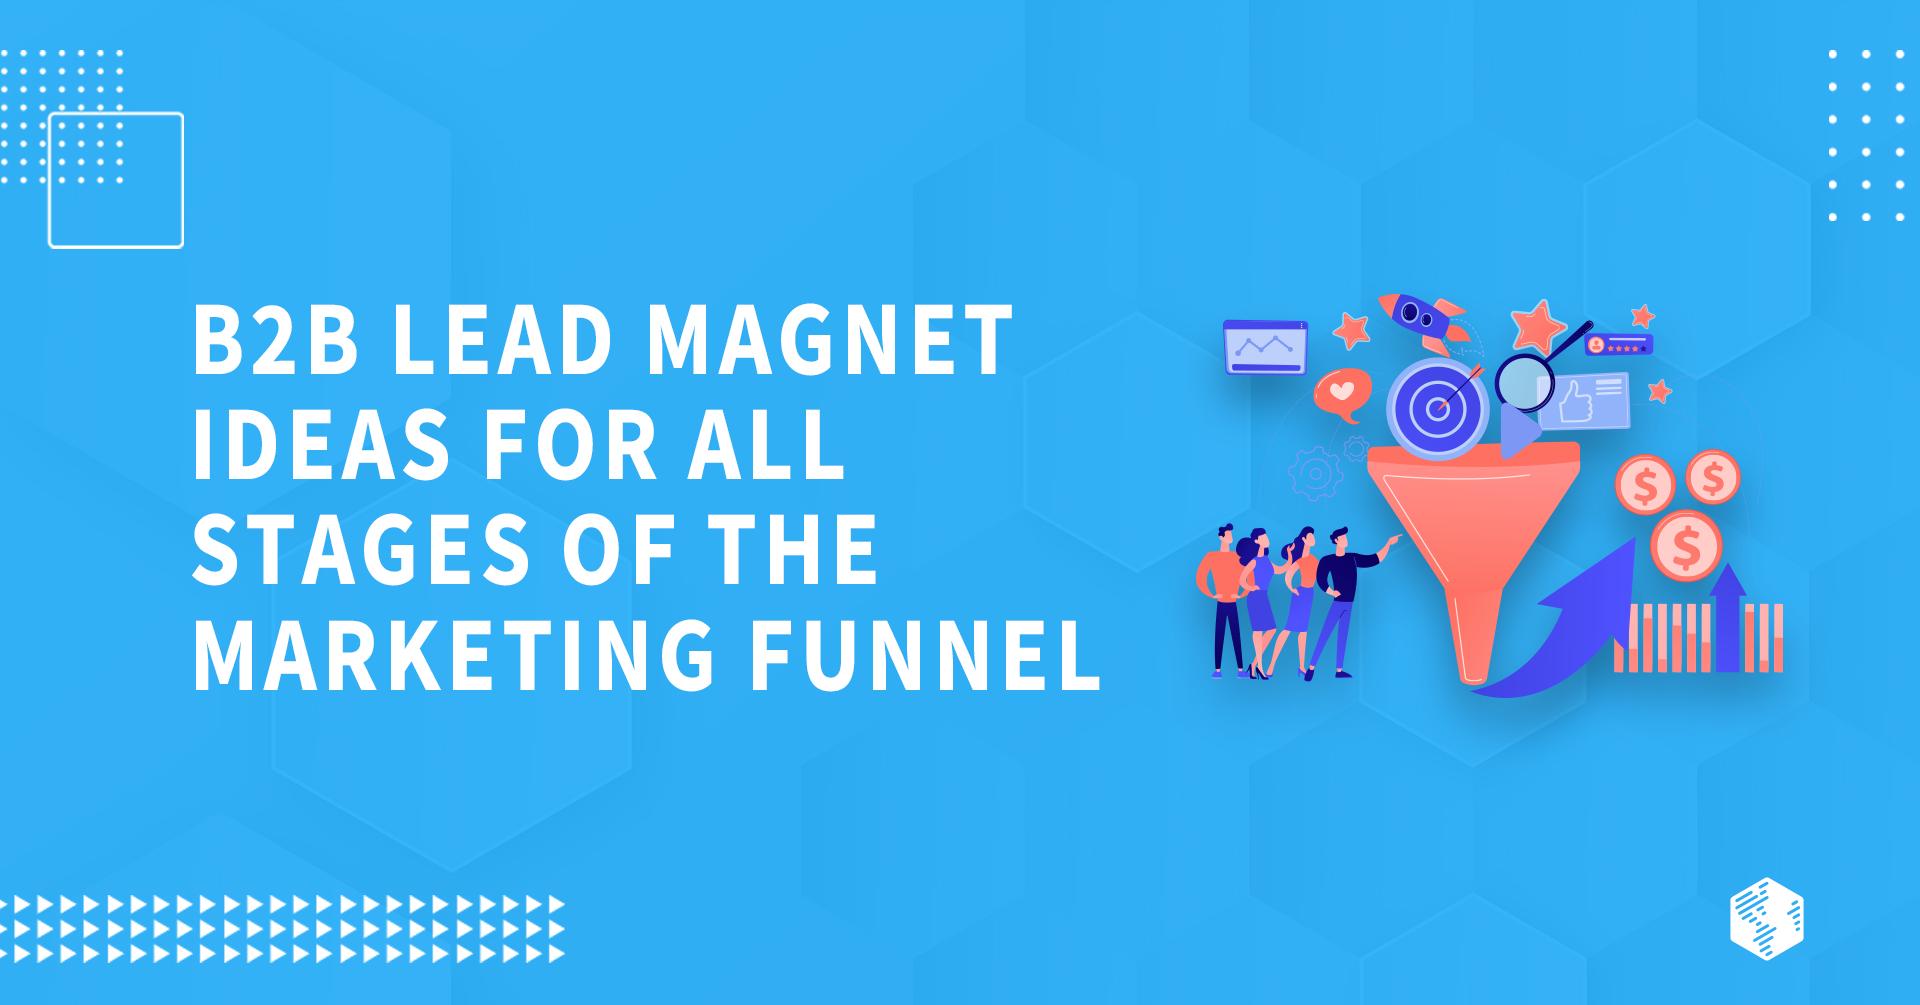 B2B Lead Magnet Ideas for All Stages of the Marketing Funnel